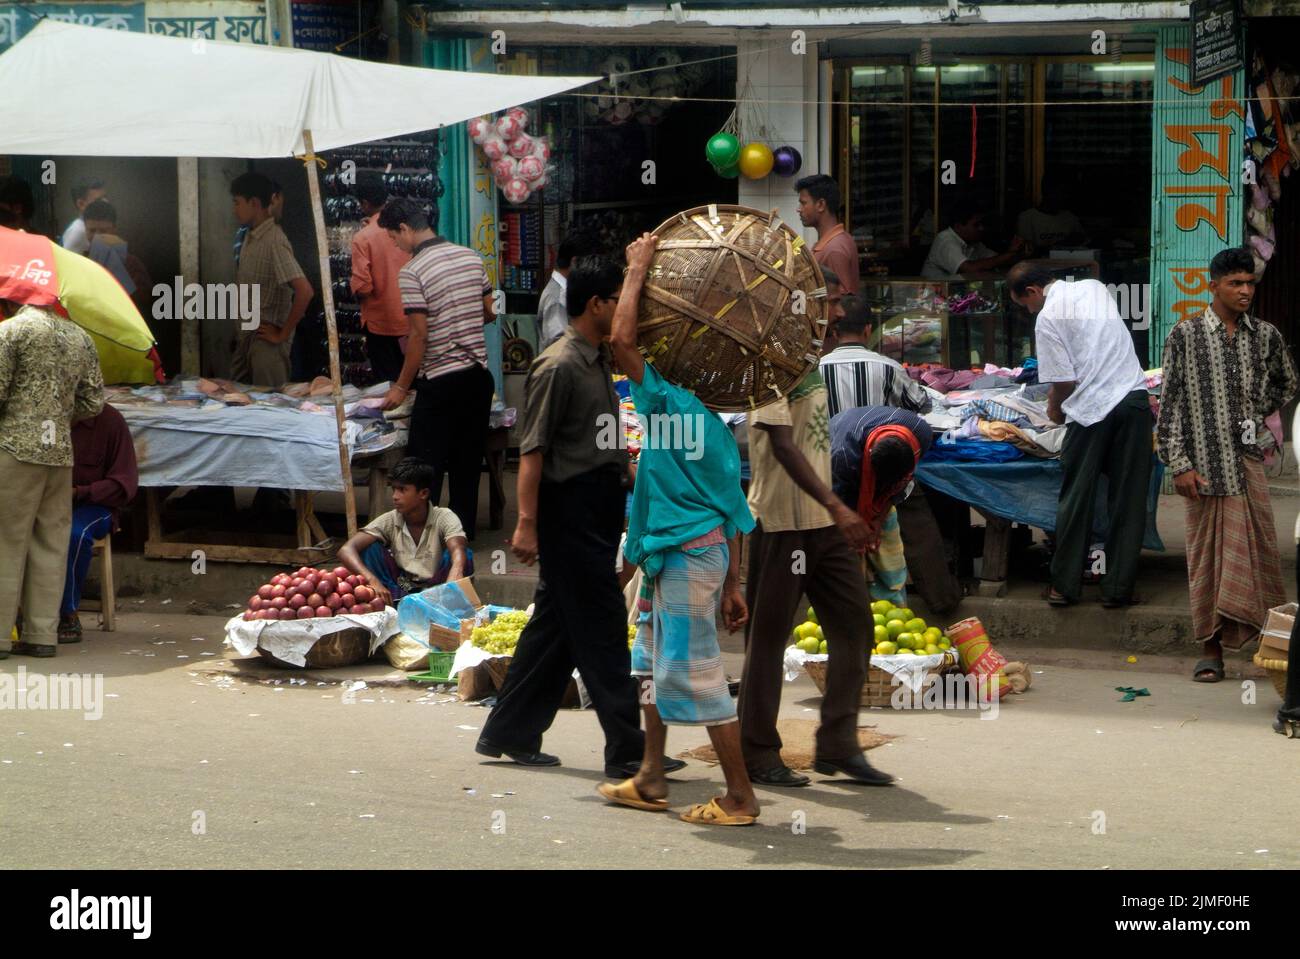 Dhaka, Bangladesh - September 17, 2007: Unidentified people on traditional street market in the capital city Stock Photo